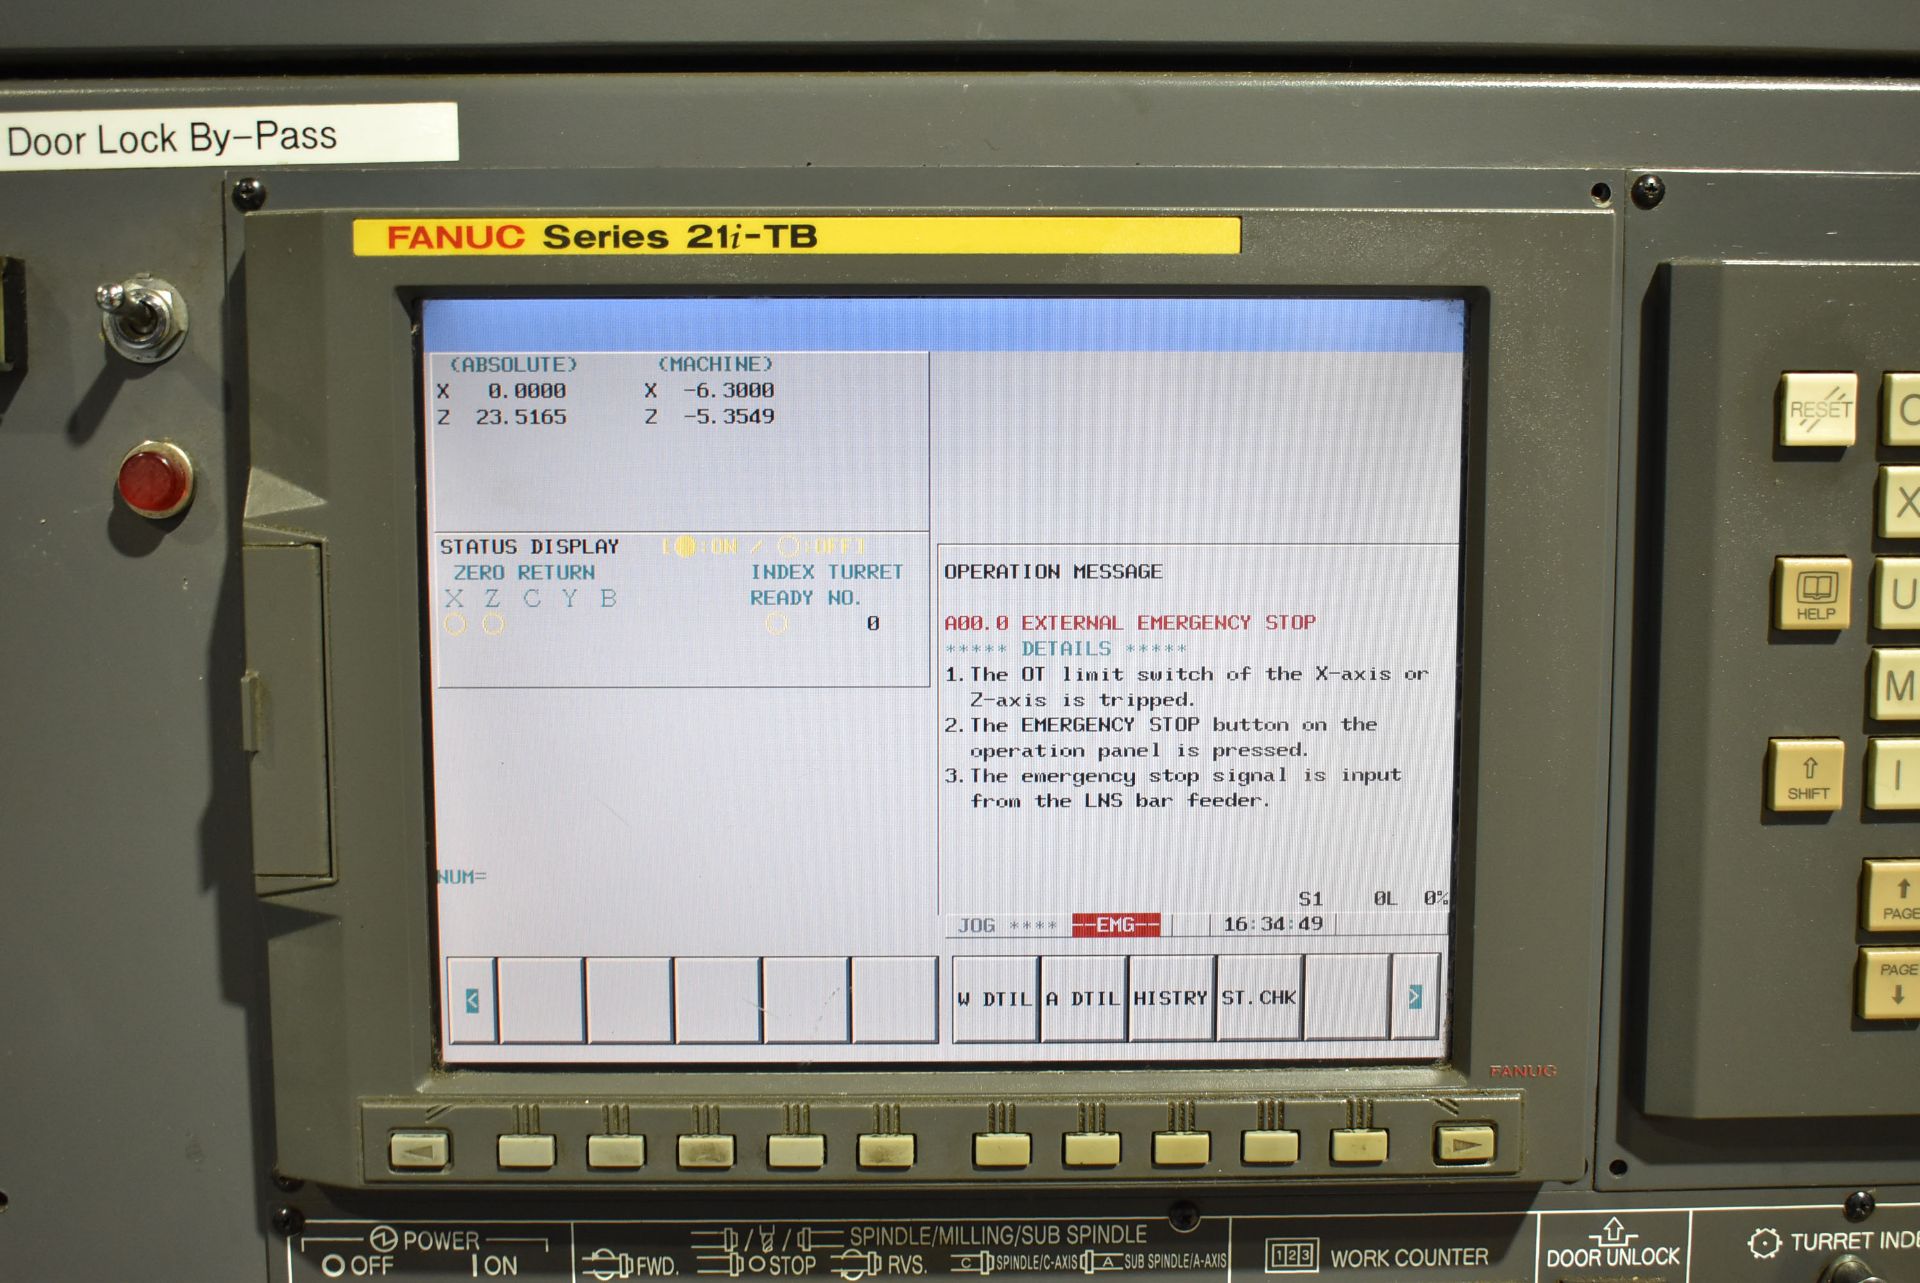 NAKAMURA-TOME (2009) SC-450 CNC TURNING CENTER WITH FANUC SERIES 21I-TB CNC CONTROL, 31.88" SWING - Image 7 of 13